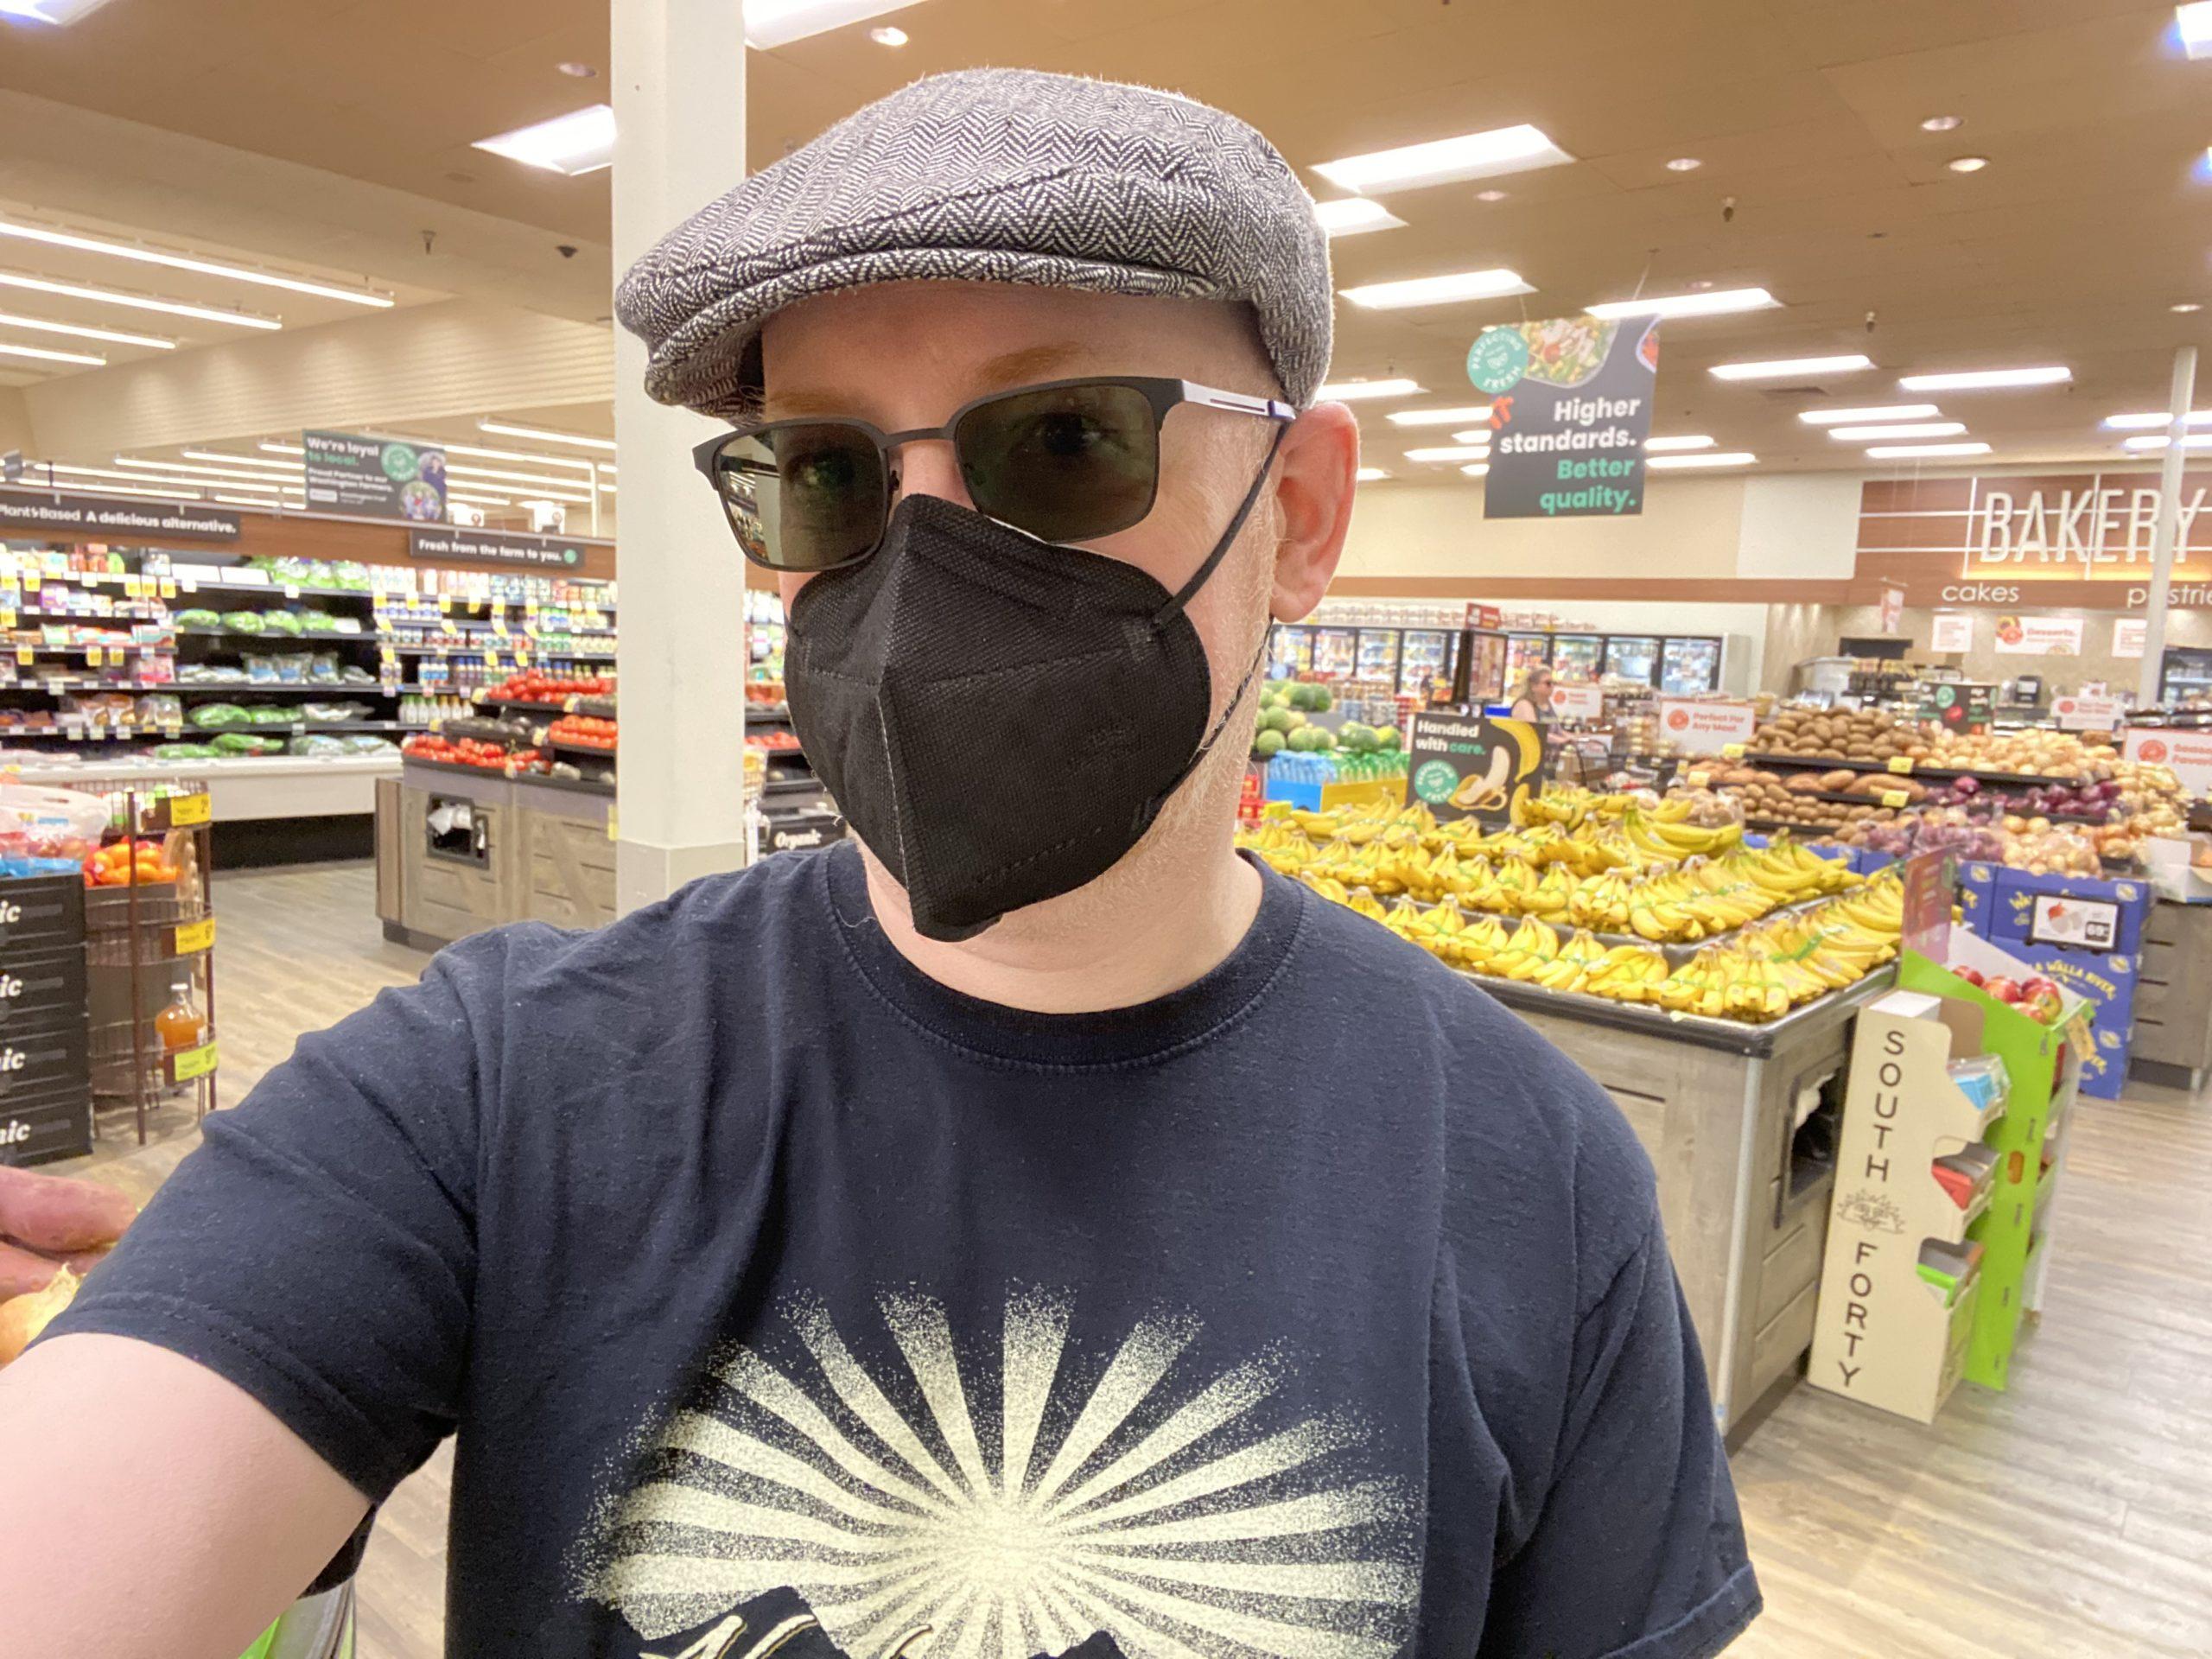 Me standing in a grocery store, wearing a grey cap, black t-shirt, black KN95 mask, and dark sunglasses.